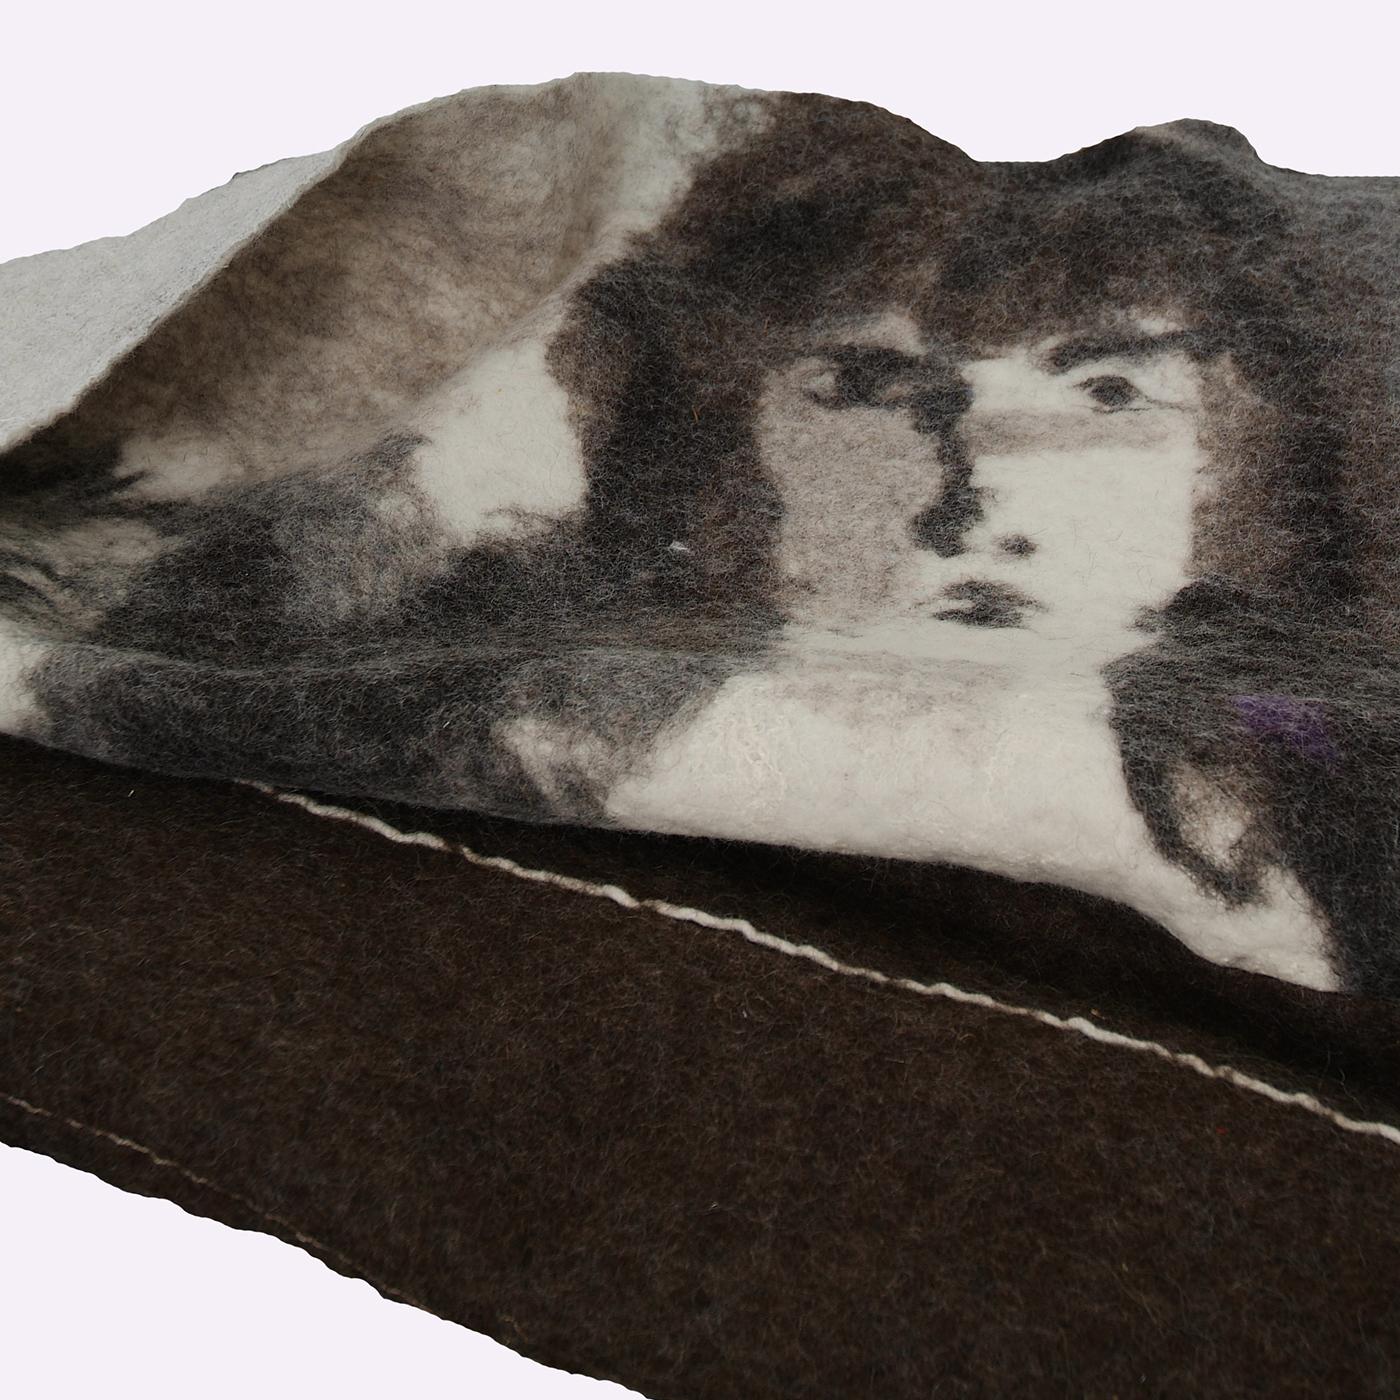 This Friends blanket features an image of male faces. The nuno felting technique consists of massaging wool fibers by hand onto natural fabrics like cotton, silk and hemp linen with water and soap. As it is difficult to control this method, the